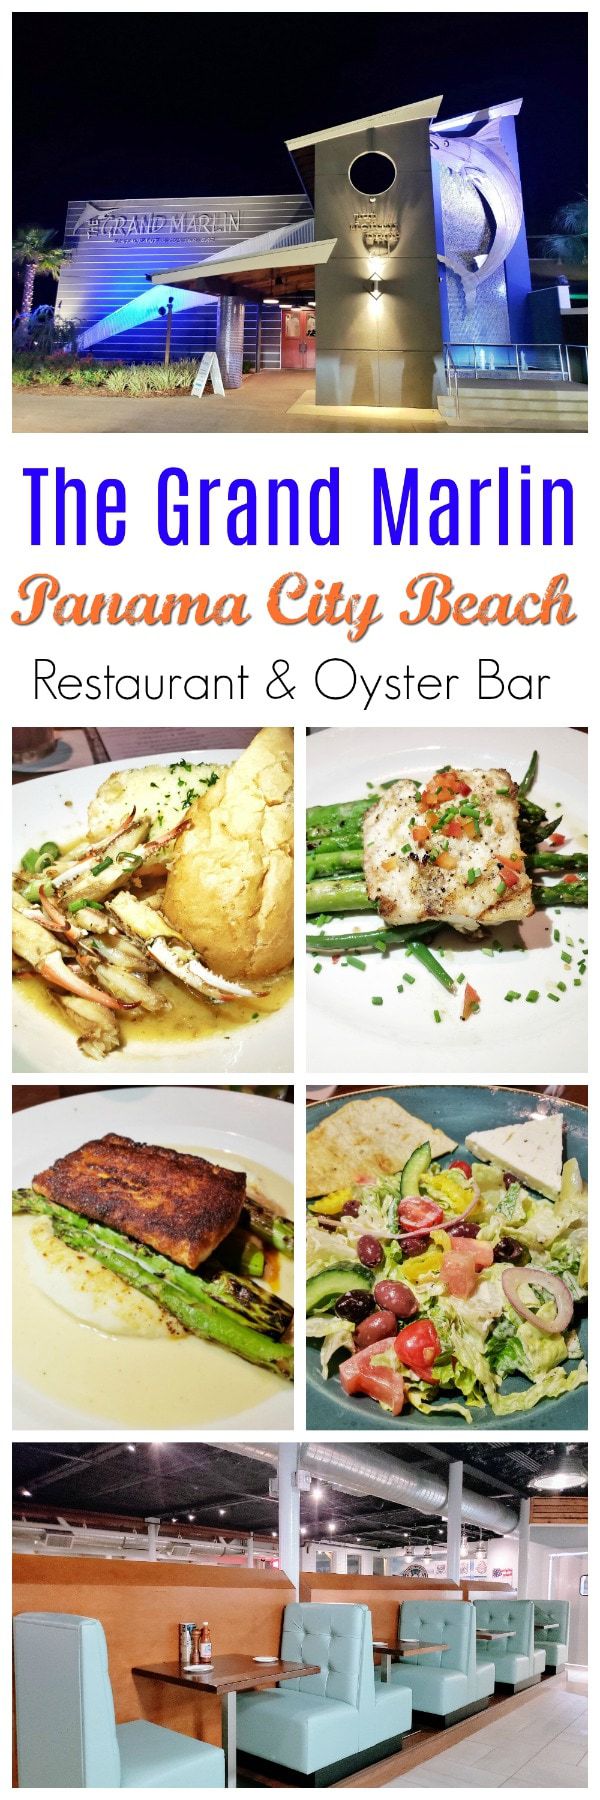 The Grand Marlin: If you are looking for a restaurant that truly puts the "fresh" in fresh seafood, The Grand Marlin Restaurant & Oyster Bar is where you need to go.It is the perfect melting pot for tourists and locals to all come together and enjoy the excellent flavors of the perfectly cooked food. #GrandMarlin #PanamaCityBeach